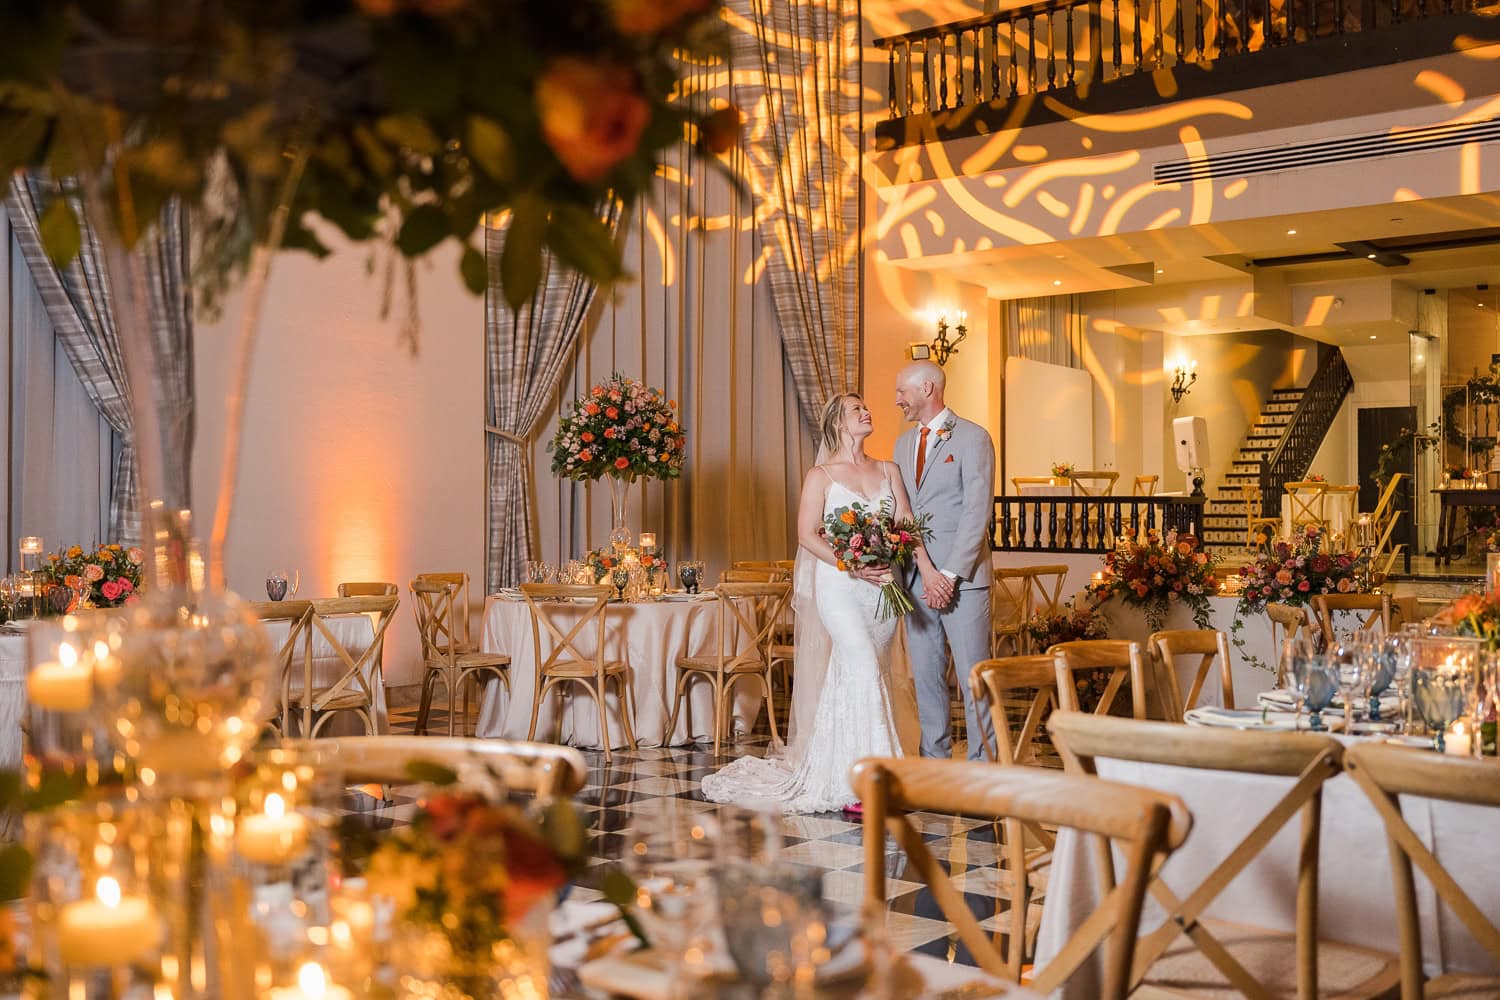 Explore Renee & Andrew's vibrant weekend wedding celebration at Hotel El Convento. From the rehearsal dinner to the colorful ceremony, it's a joyful and unforgettable event. #Wedding #PuertoRico #LoveStory